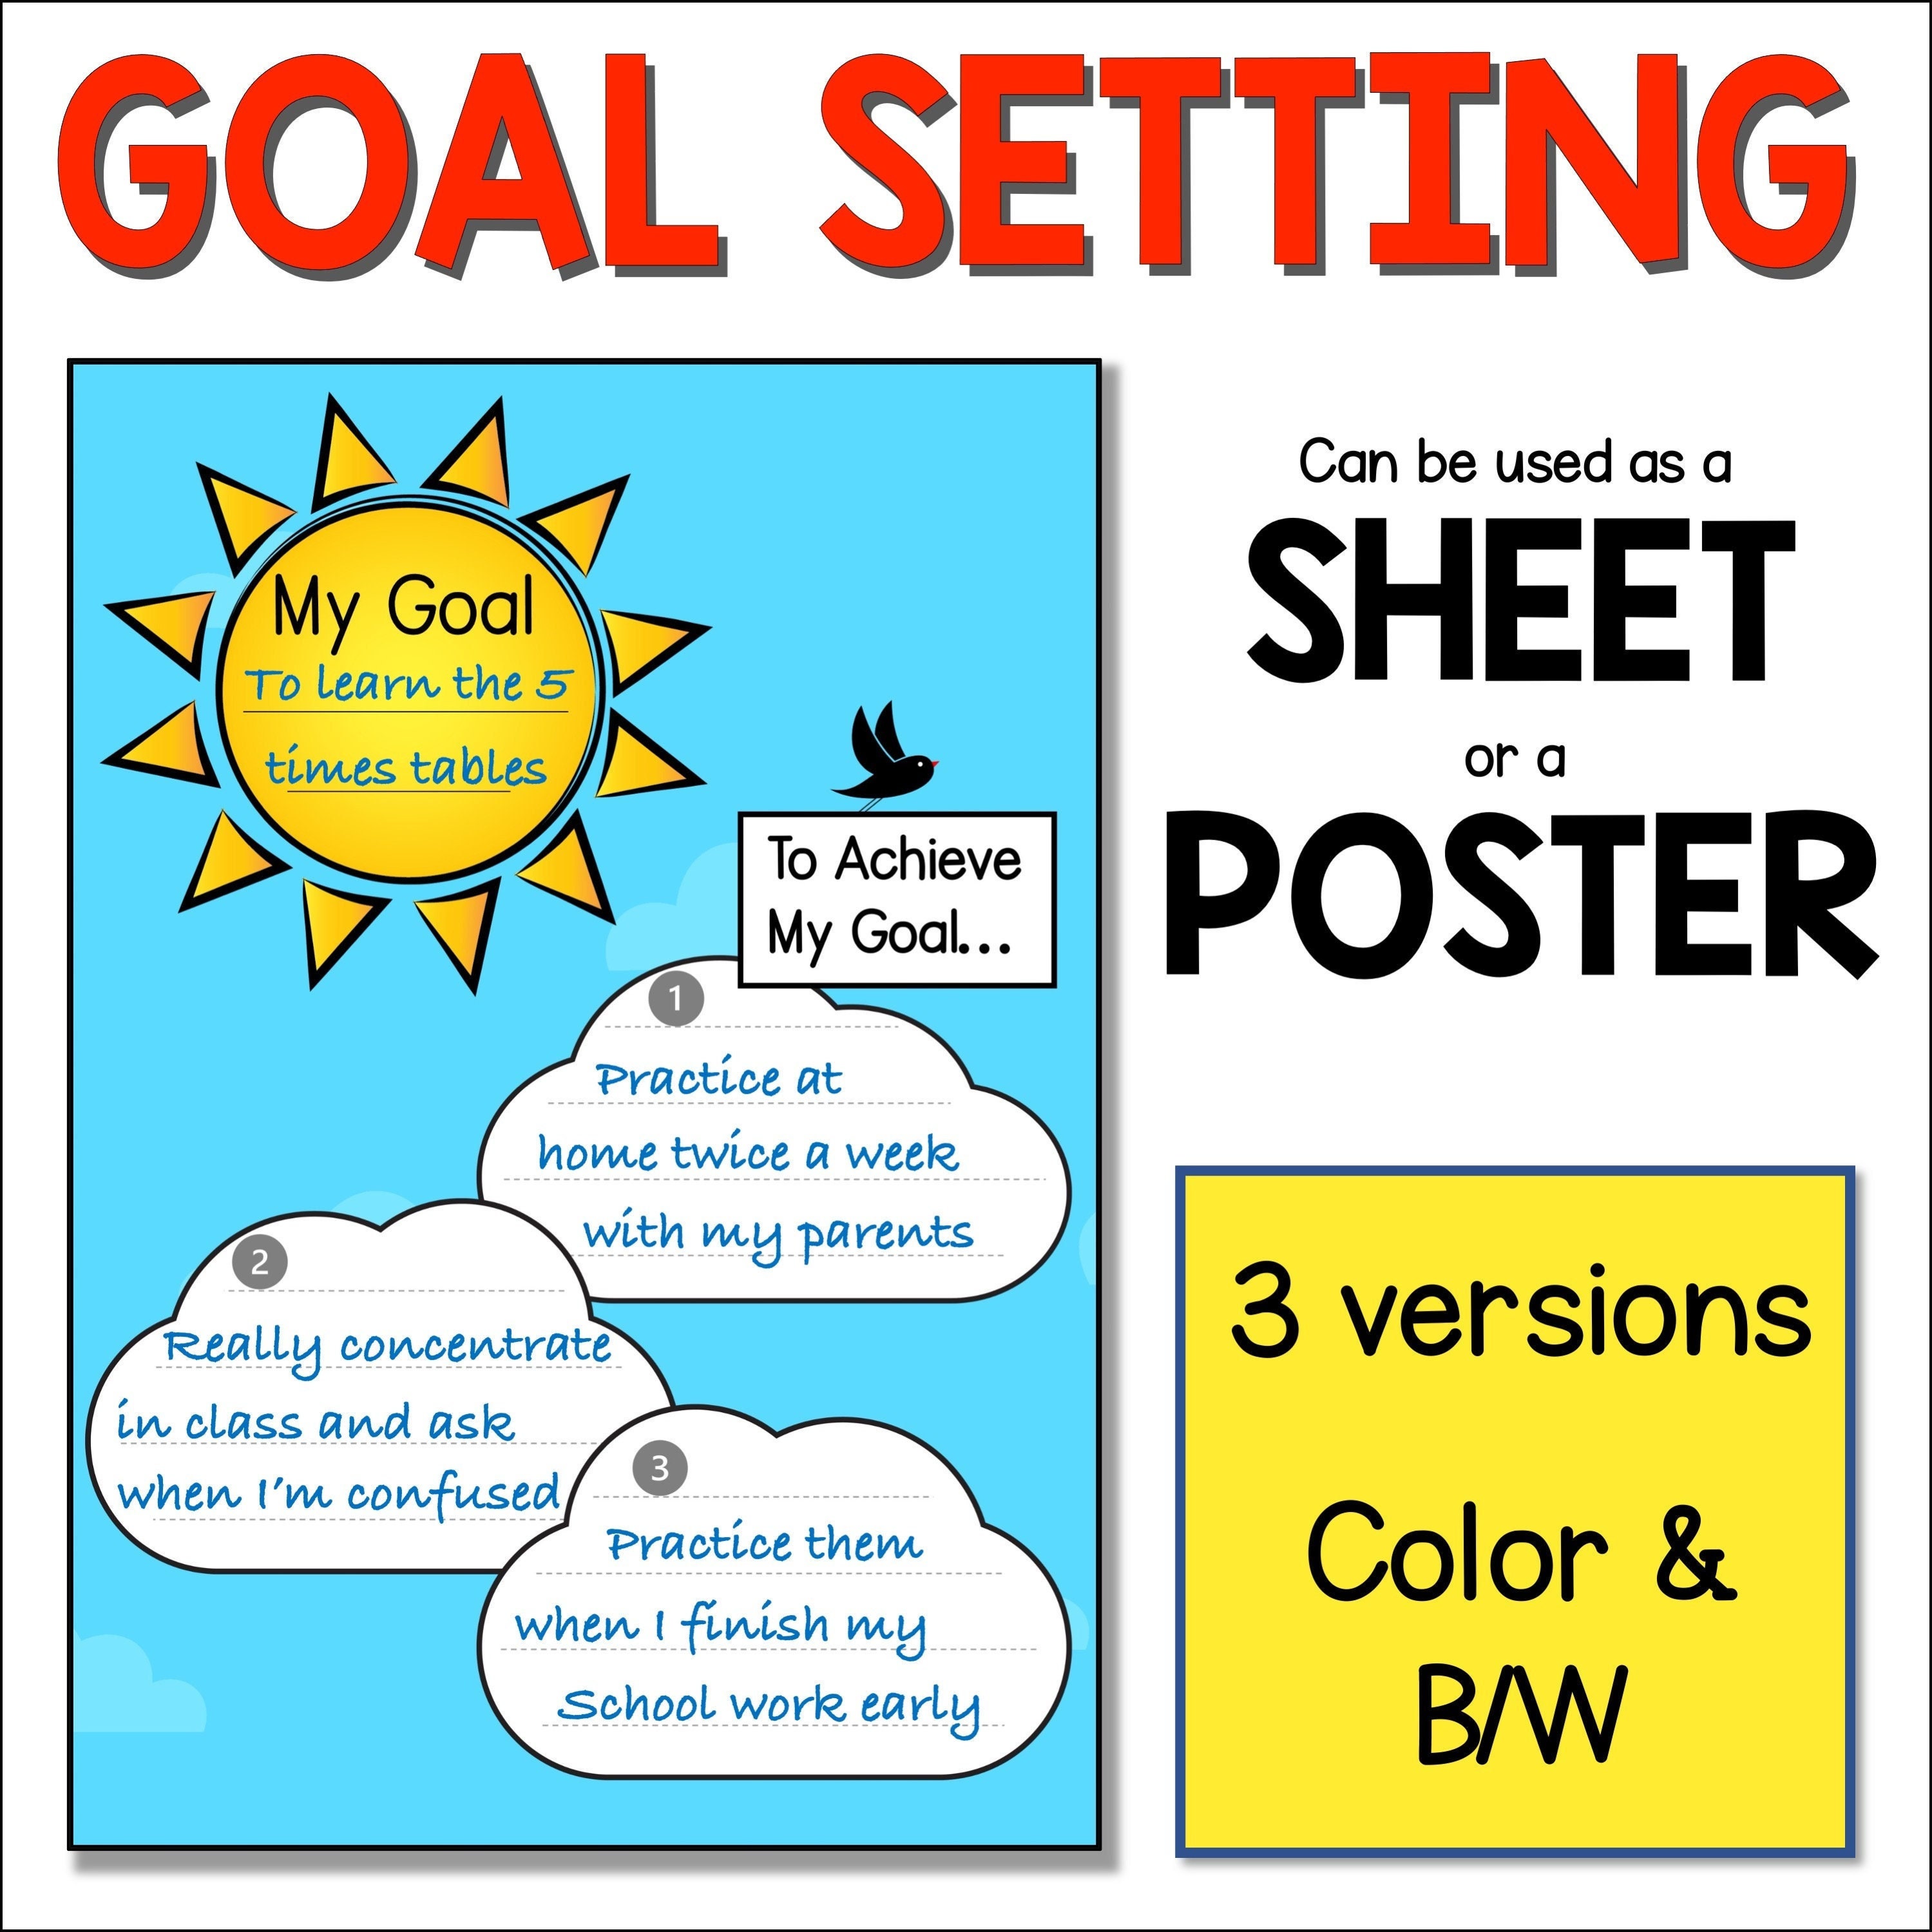 Putting goal setting at the forefront of learning